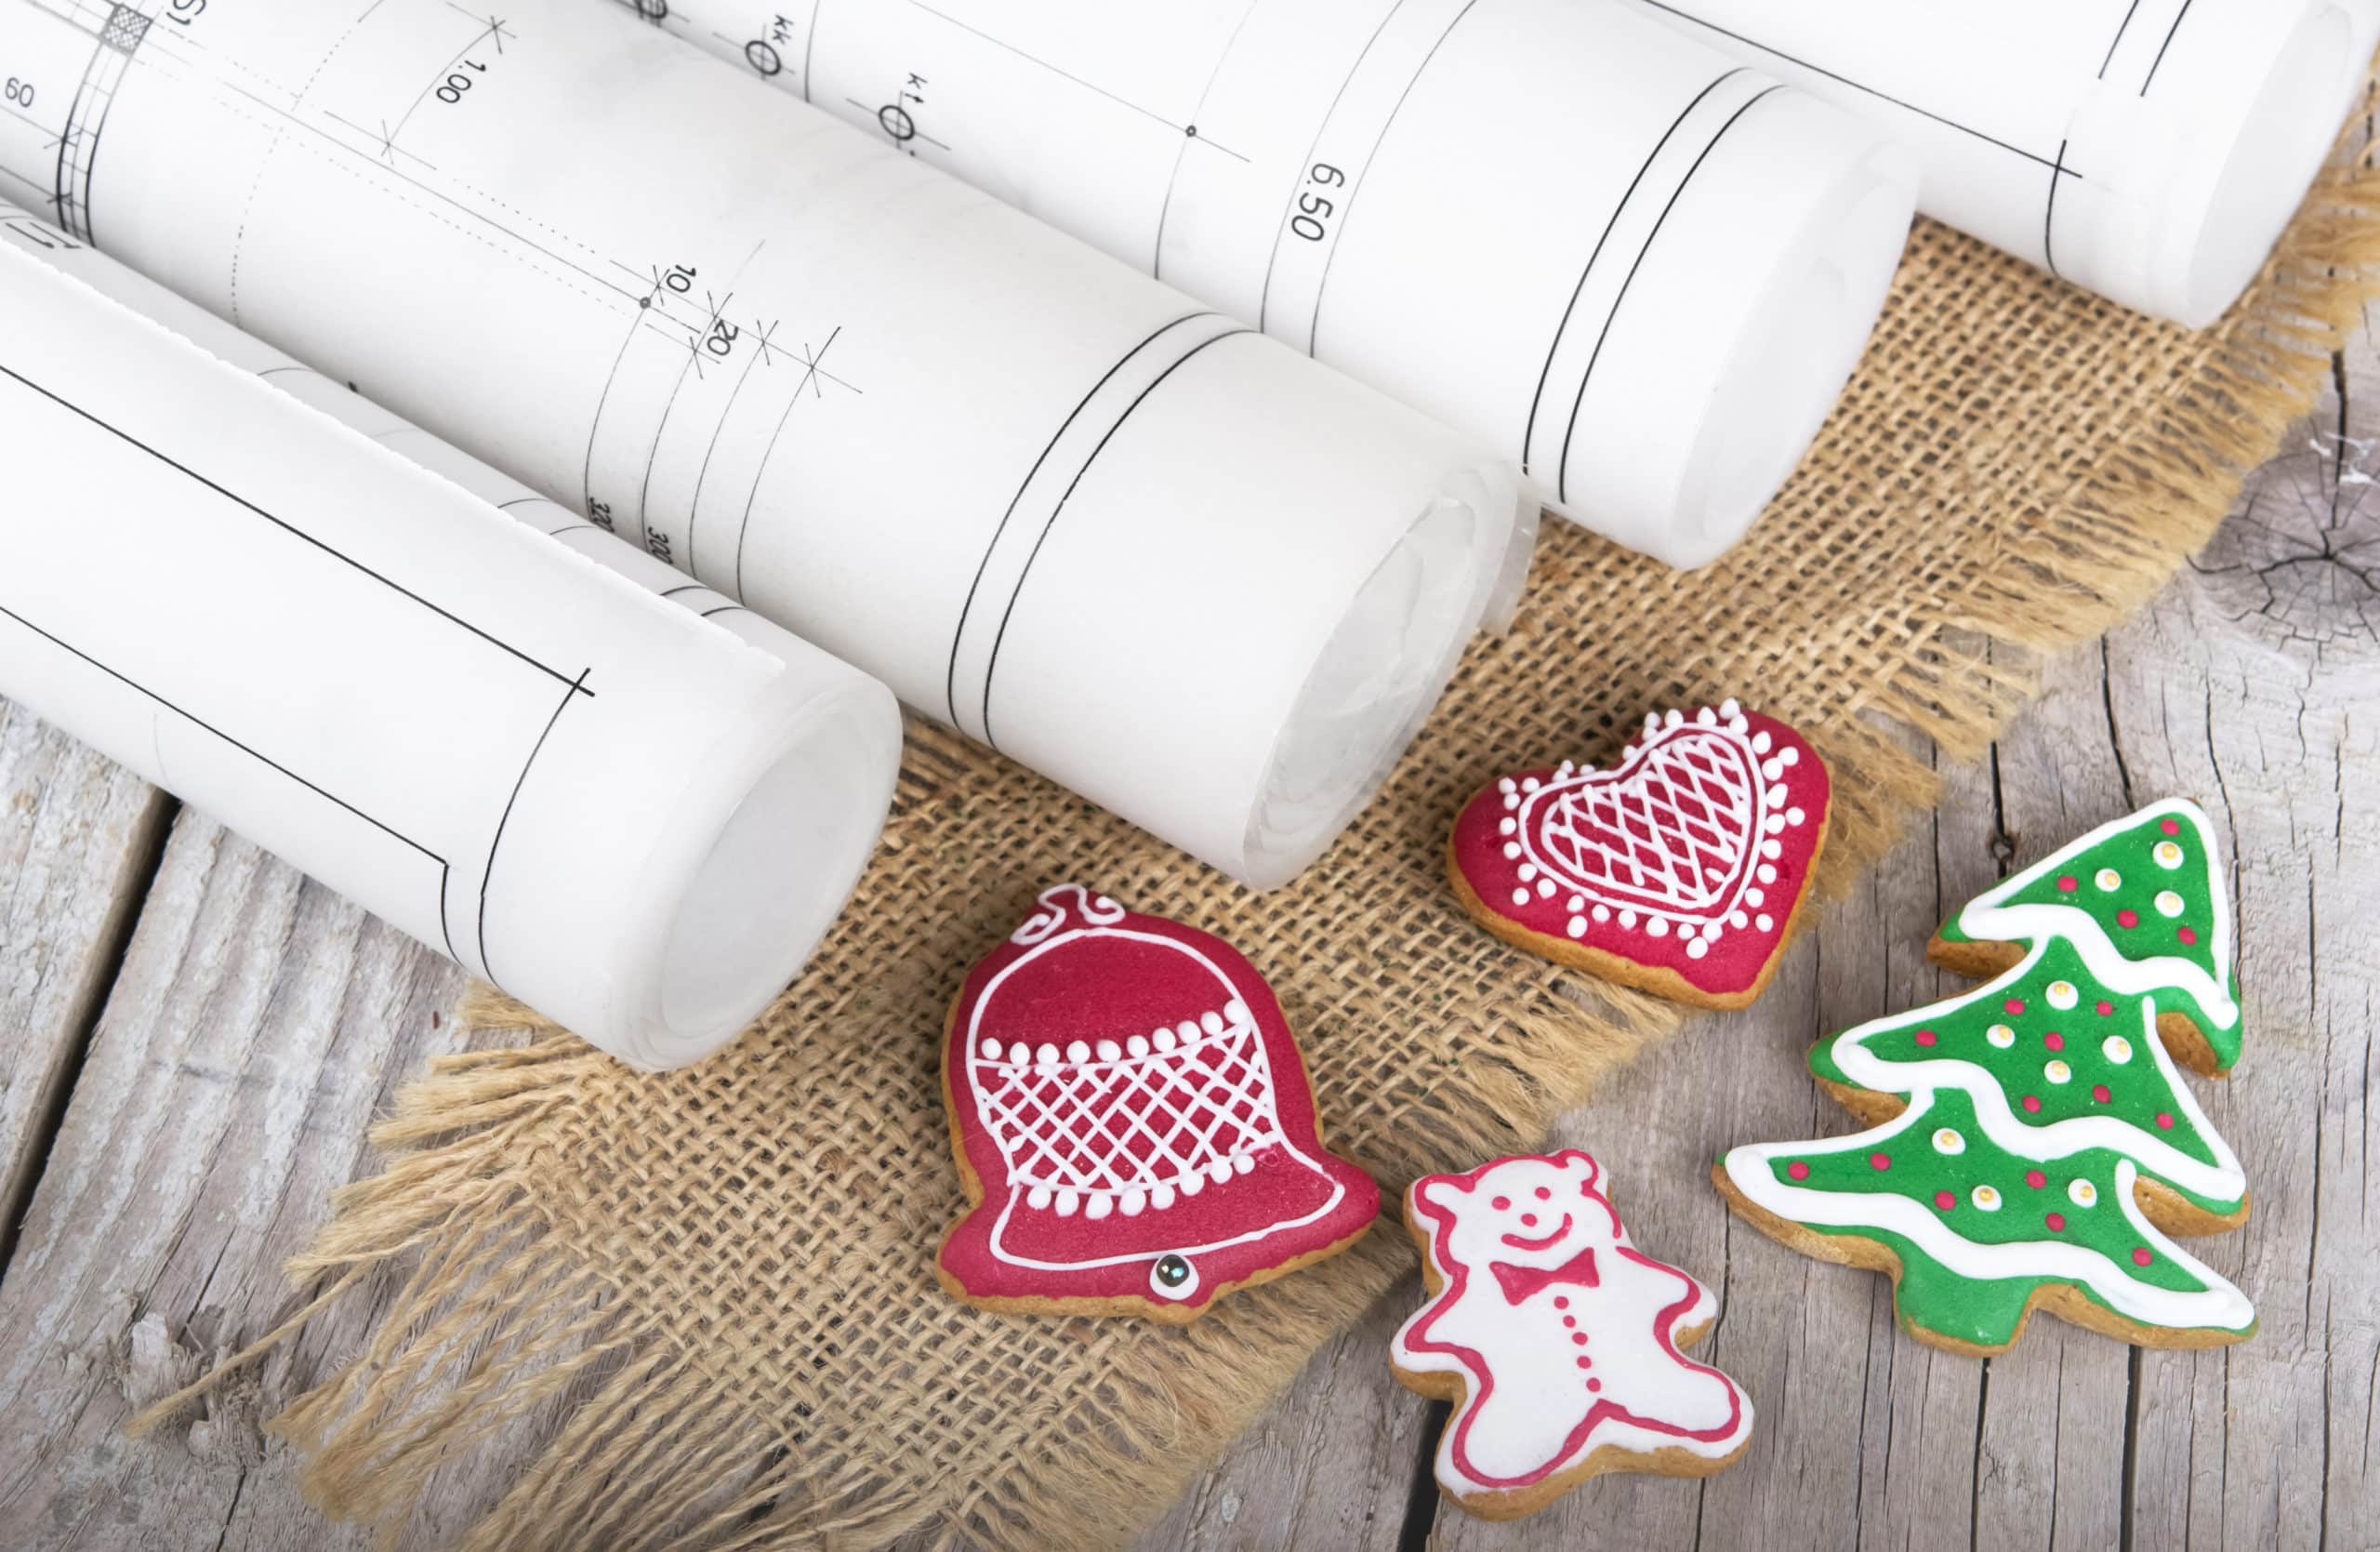 rolled blue prints sit on top of a table next to some holiday cookies as contractors contemplate holiday social media posts